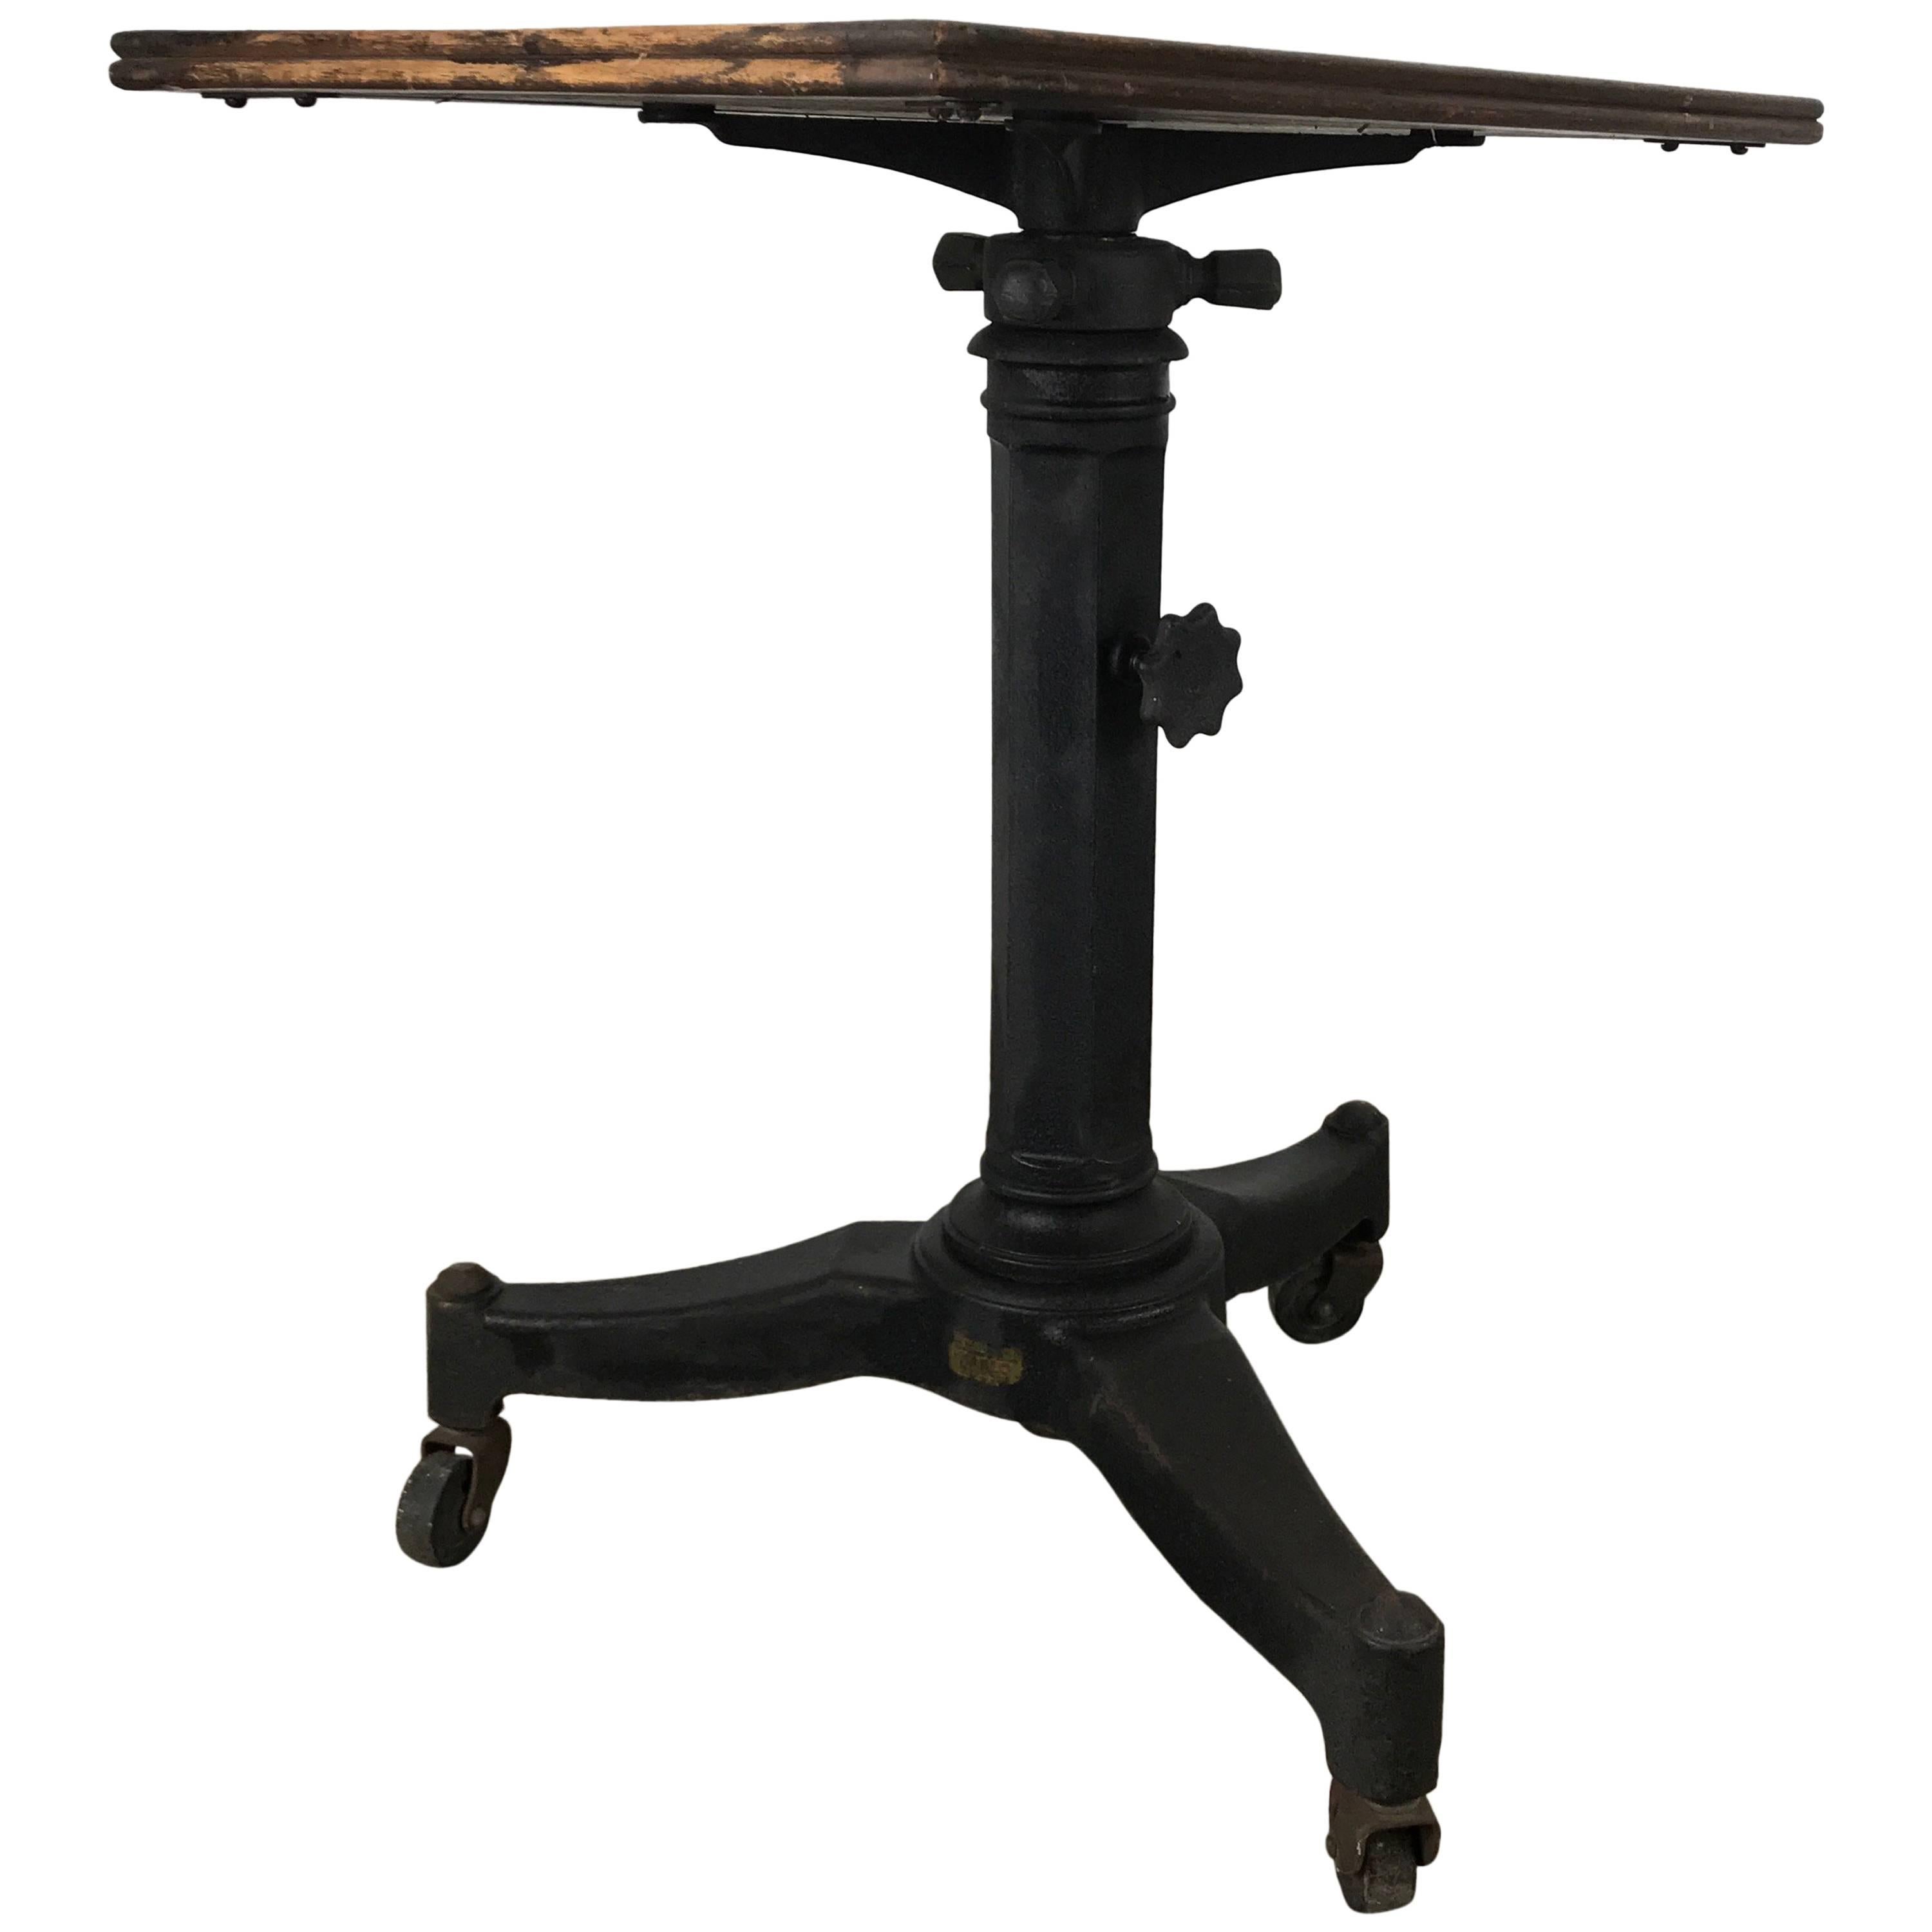 Telescopic Cast Iron and Wood Table/Stand, Karl Manufacturing Co.